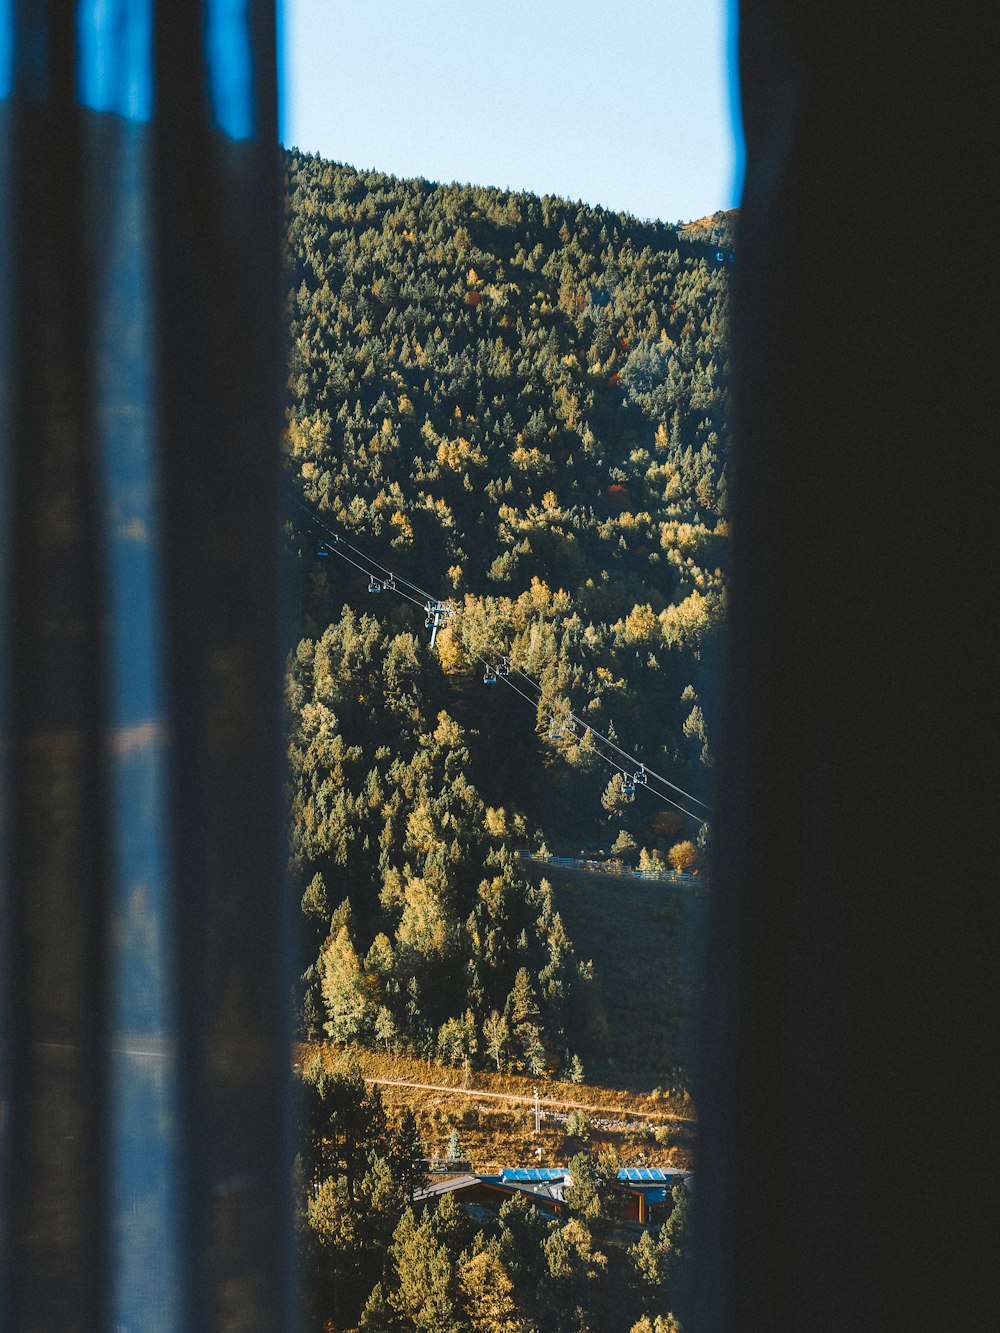 a view of a forest from a window